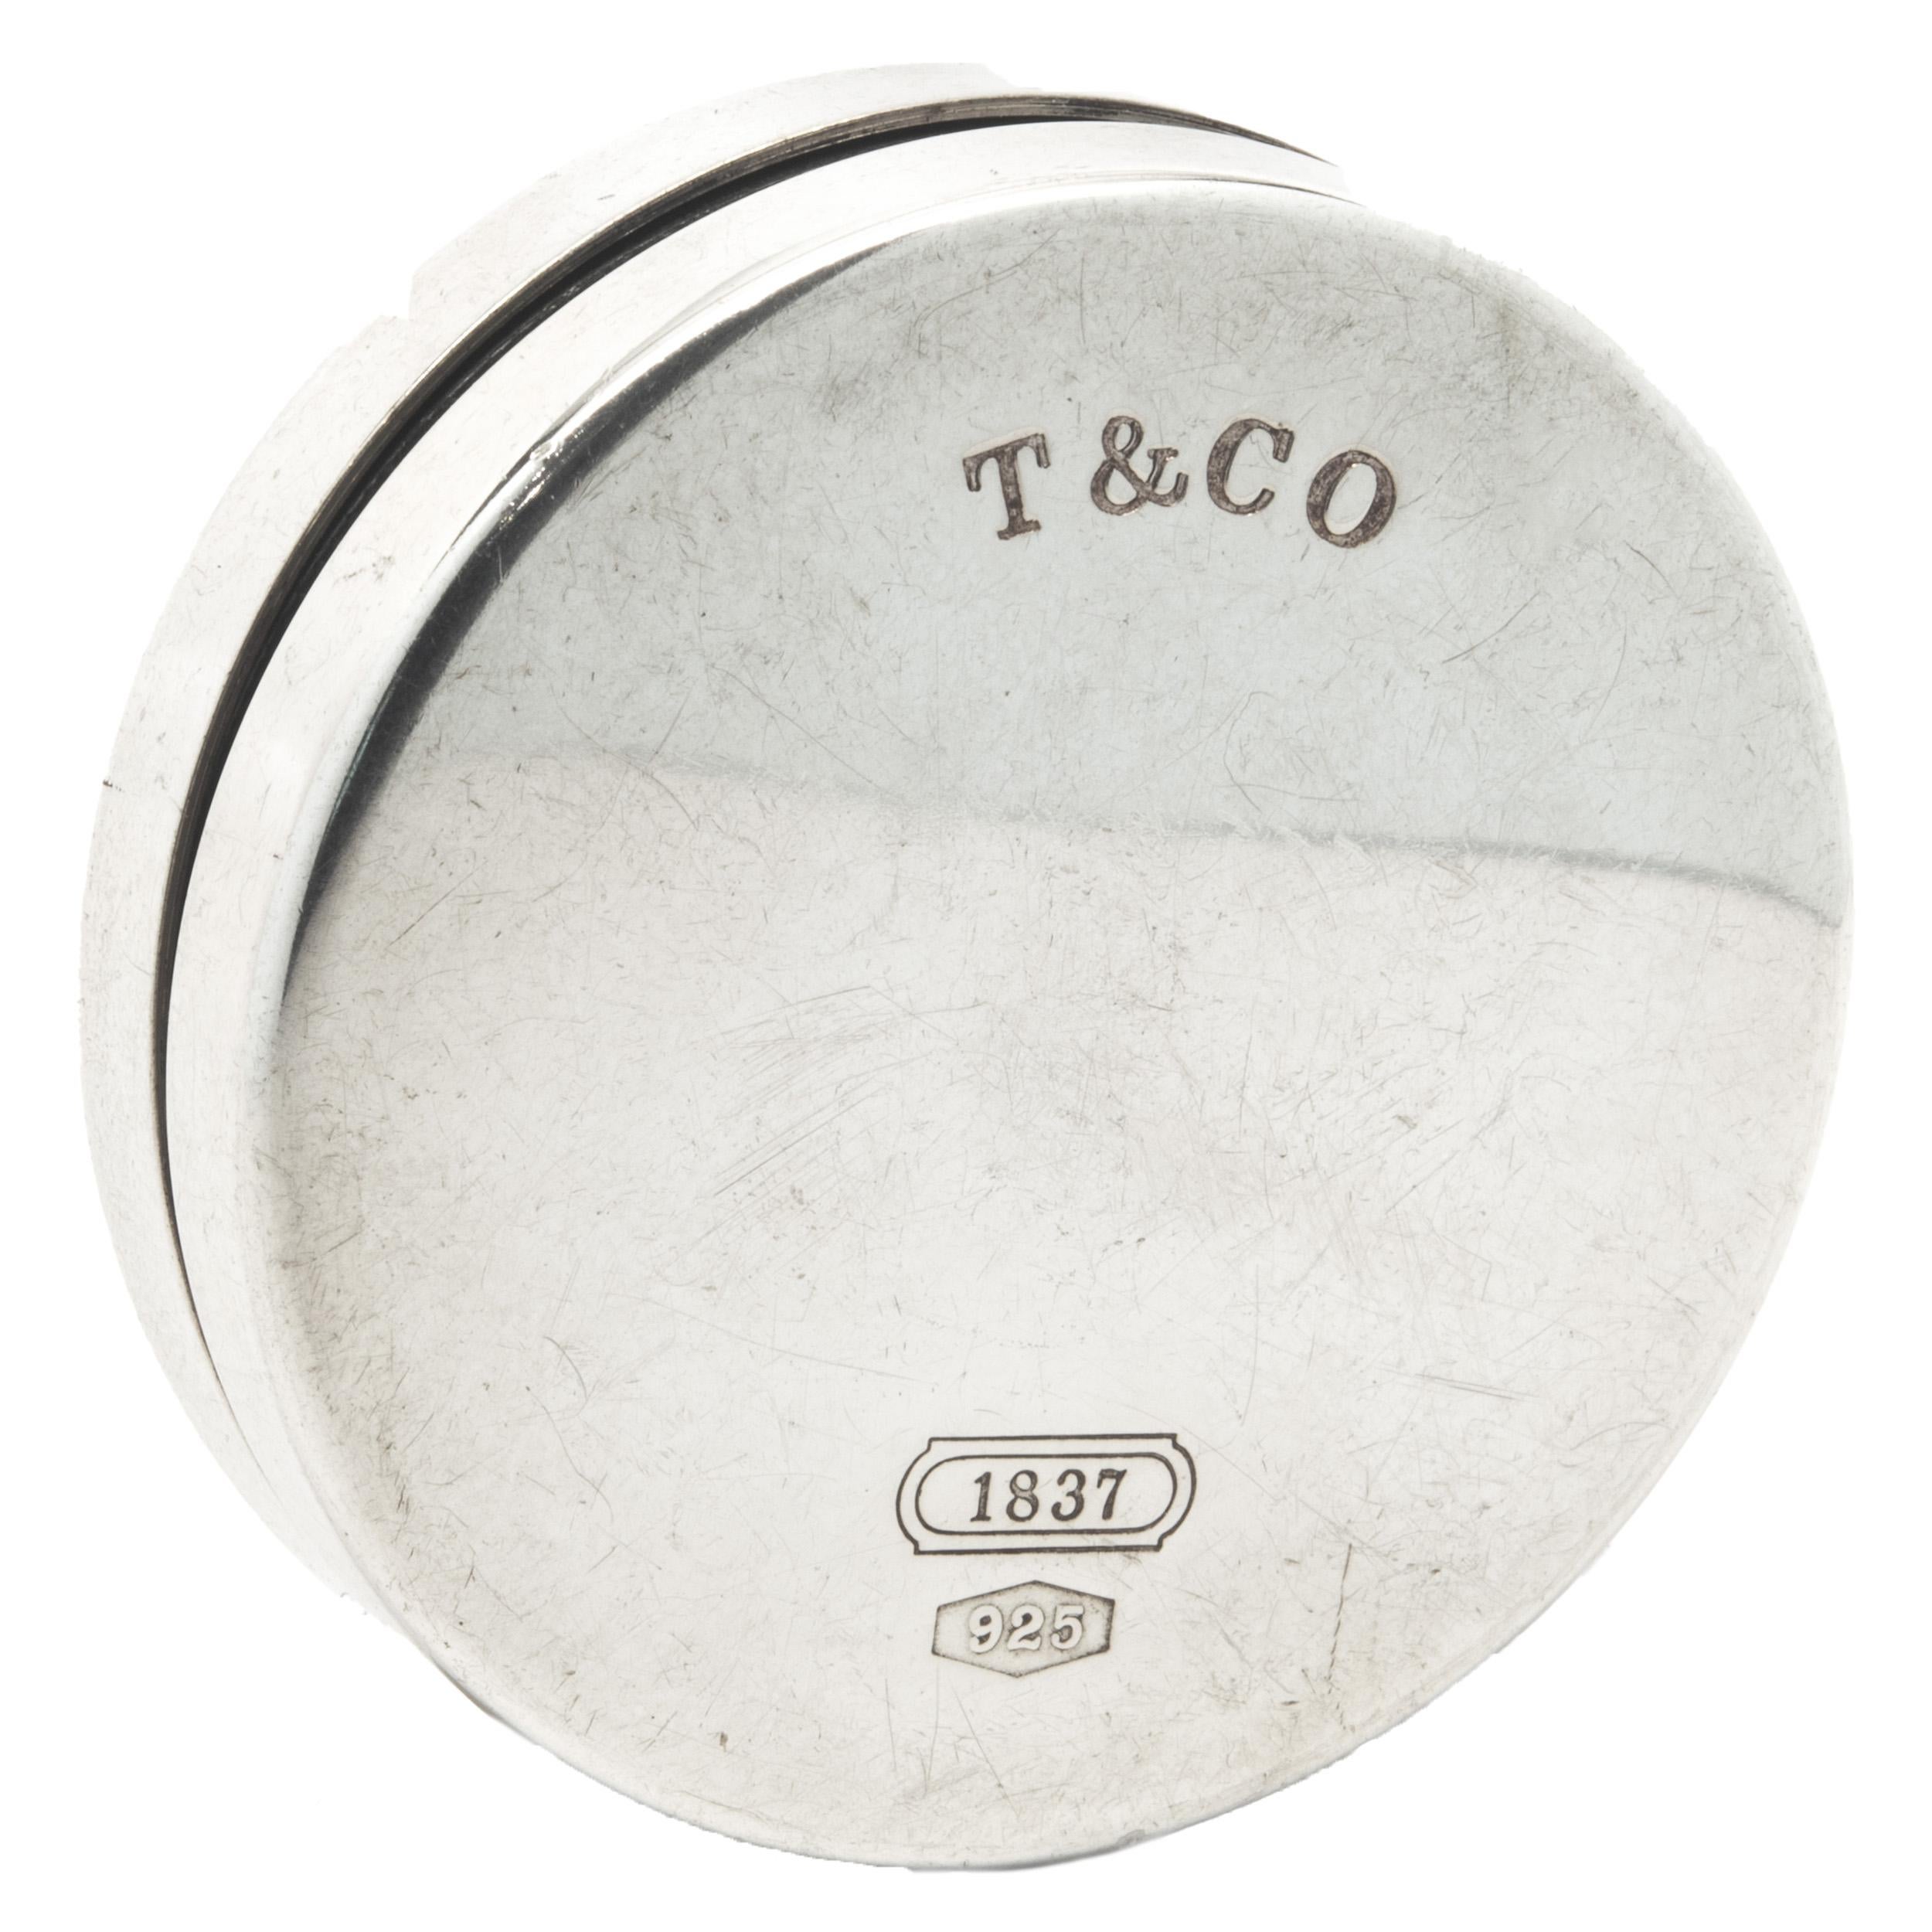 Designer: Tiffany & Co. 
Material: sterling silver
Dimensions: tape measure measures 1.75-inches wide
Weight: 65.17 grams